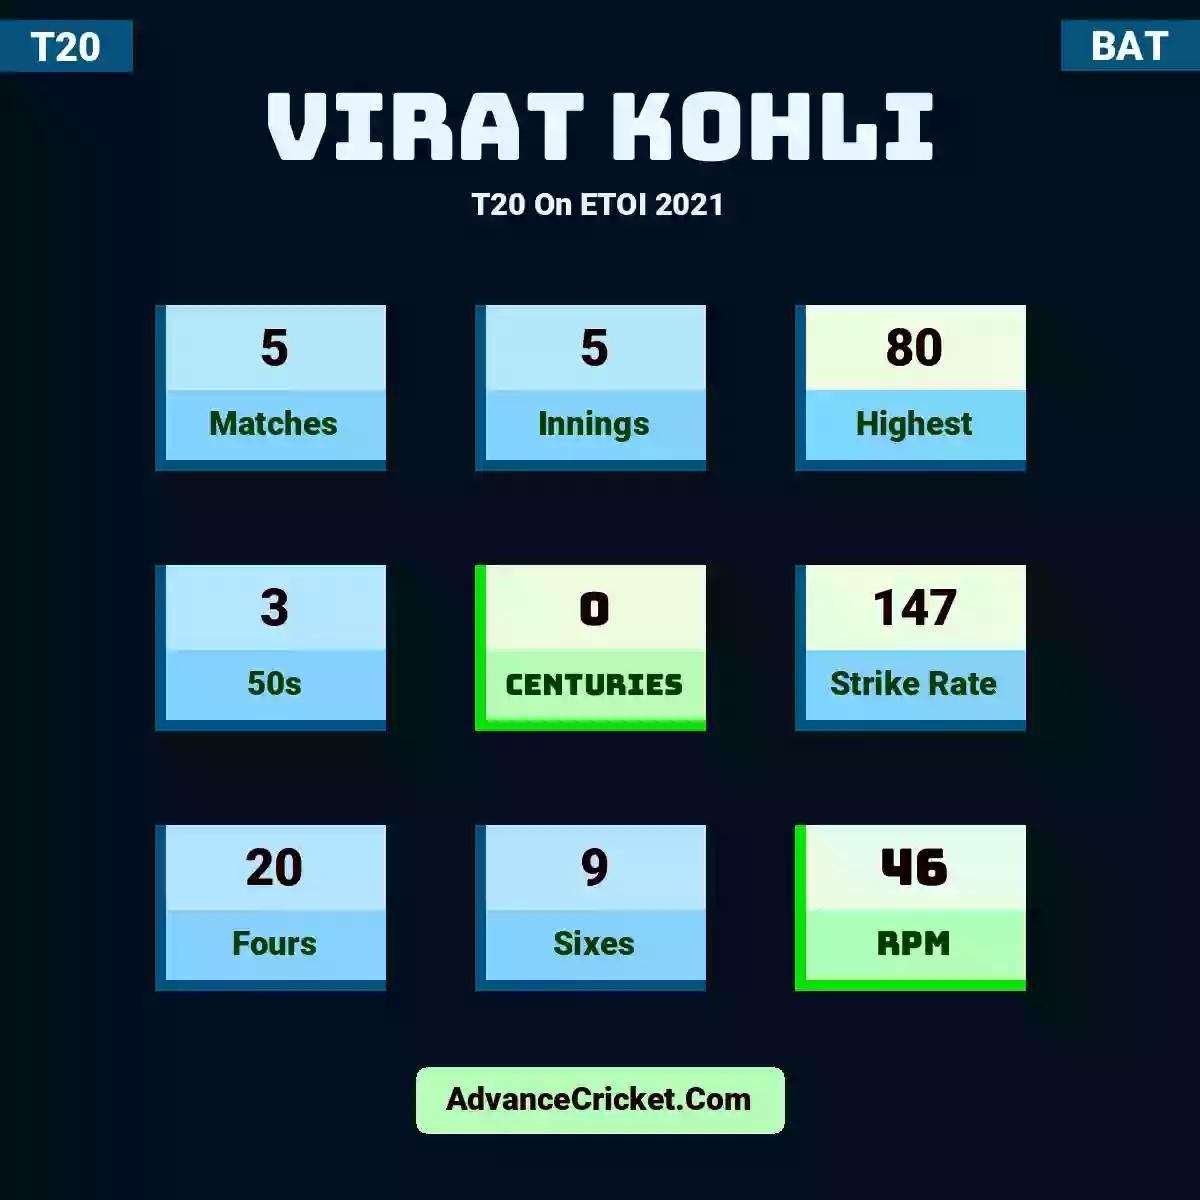 Virat Kohli T20  On ETOI 2021, Virat Kohli played 5 matches, scored 80 runs as highest, 3 half-centuries, and 0 centuries, with a strike rate of 147. V.Kohli hit 20 fours and 9 sixes, with an RPM of 46.